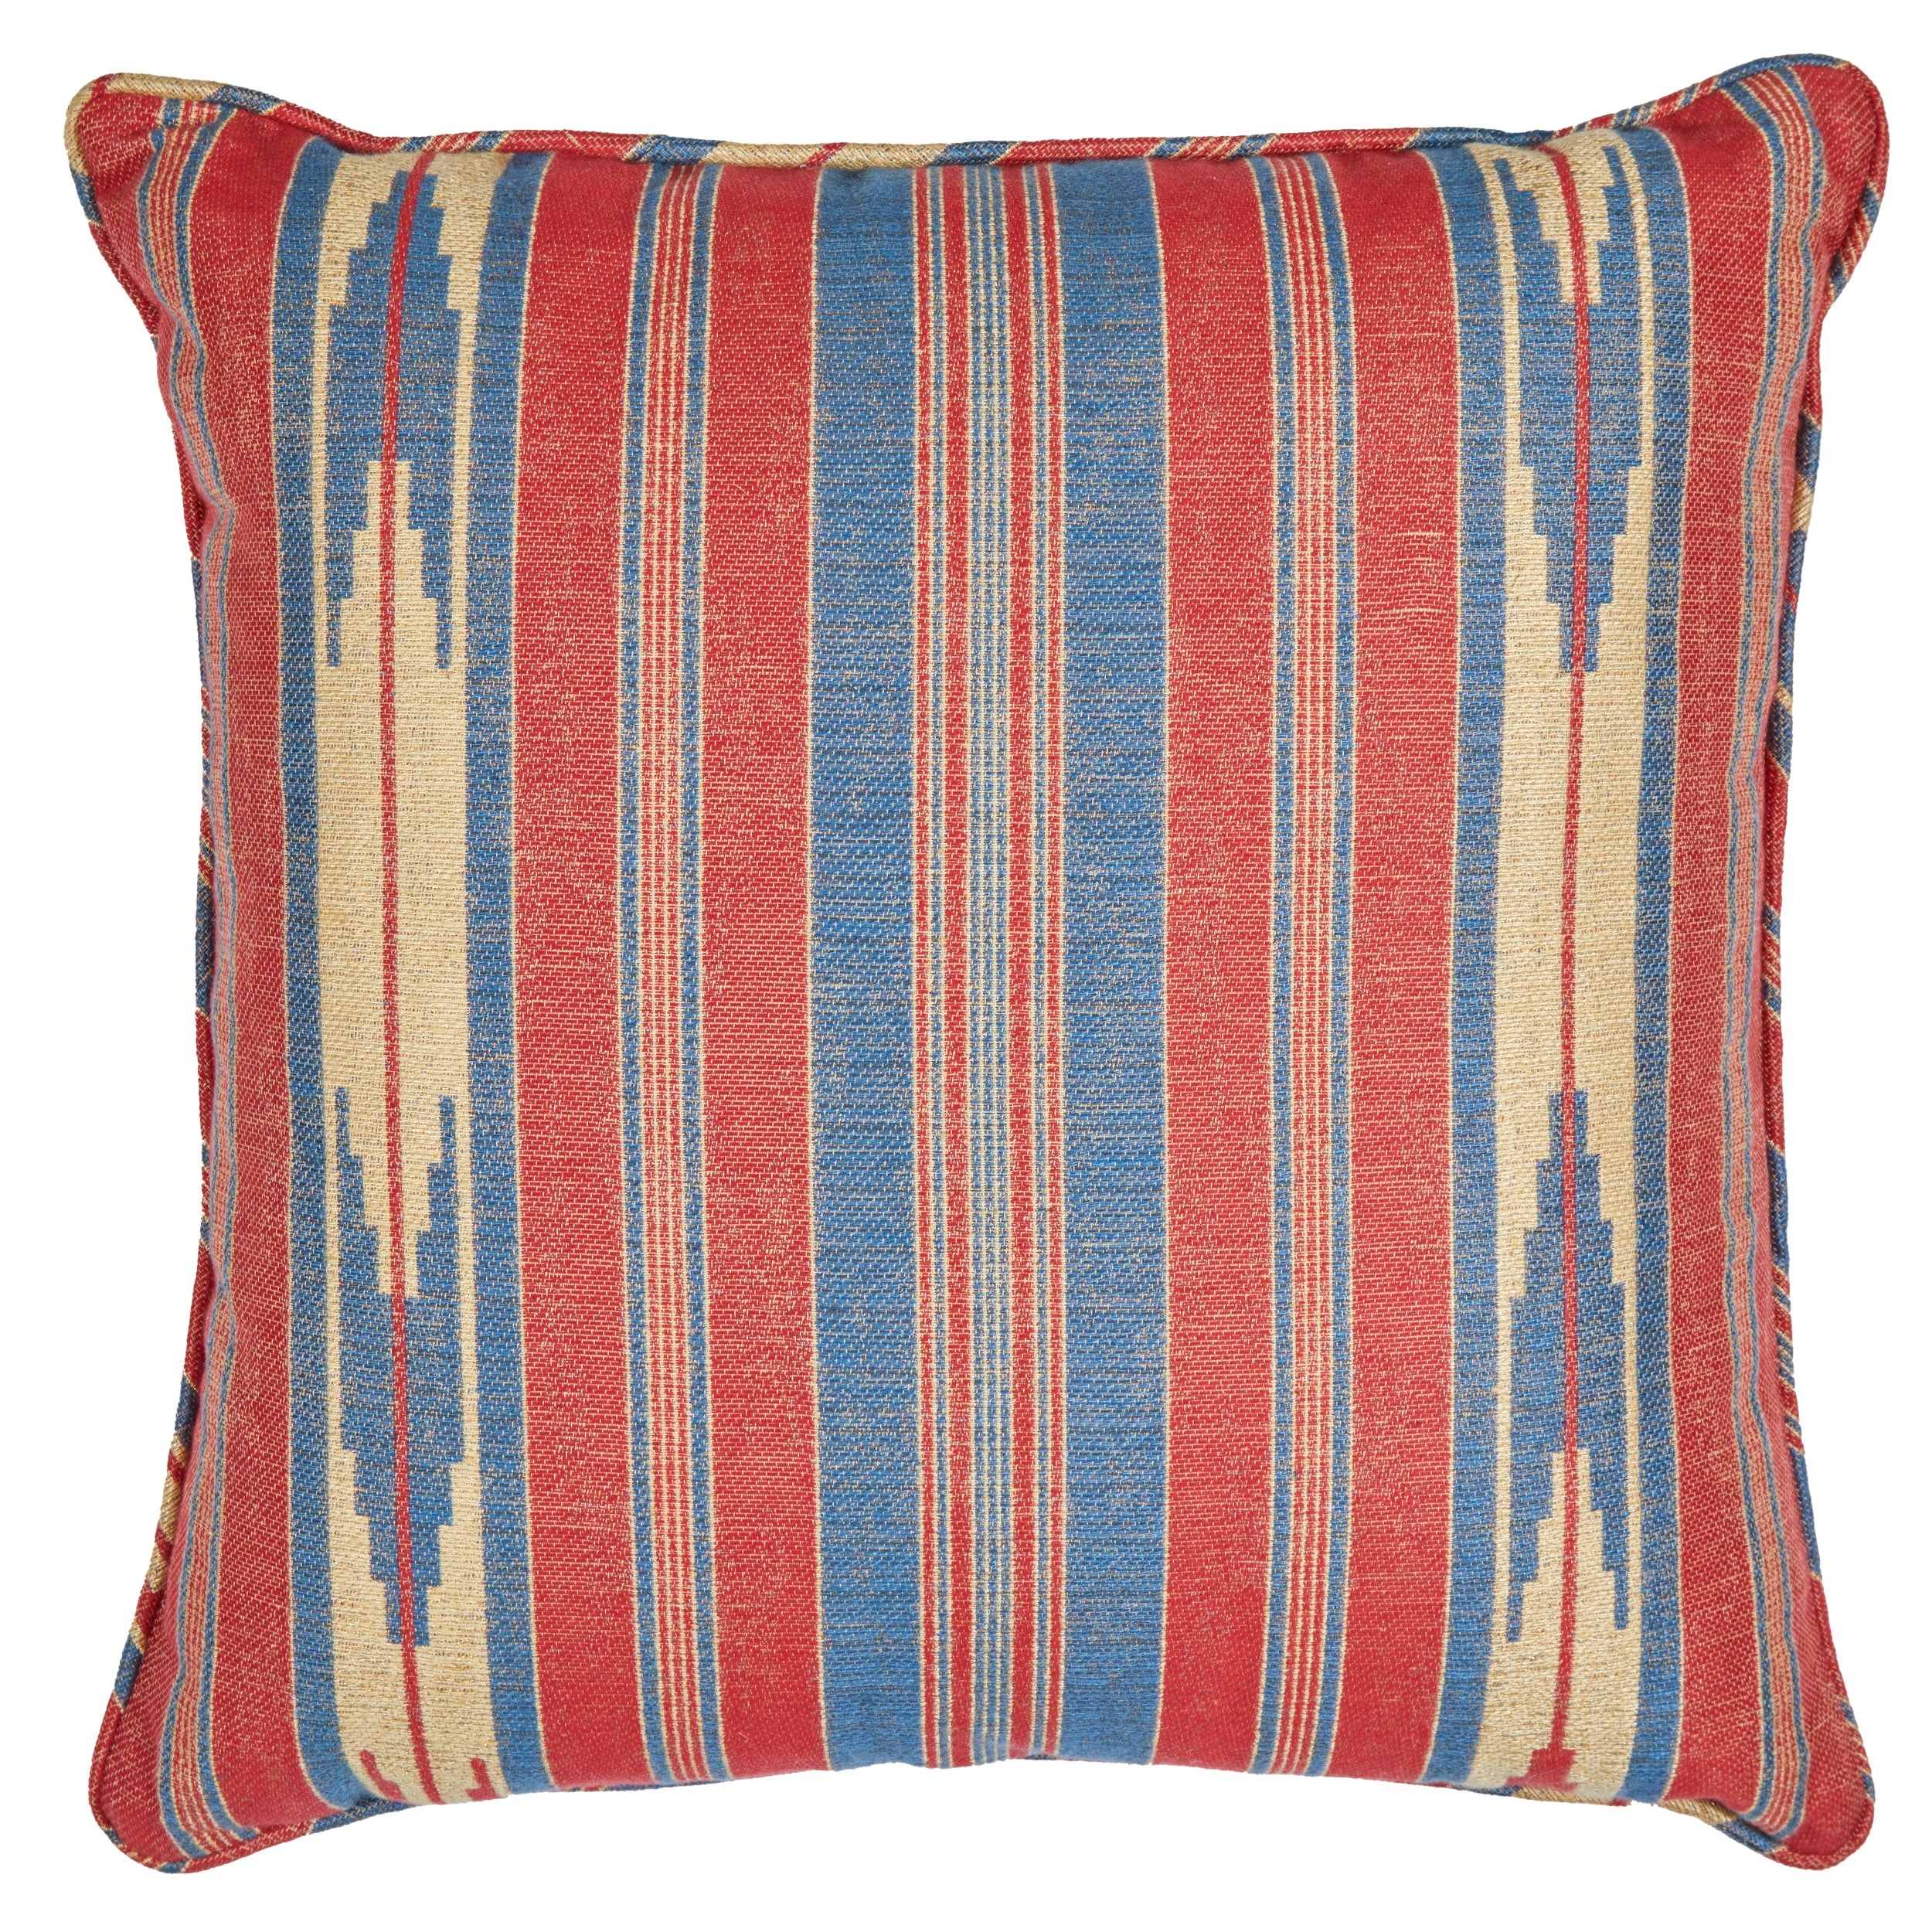 Oulton Stripe Scarlet Cushion with Self Piping